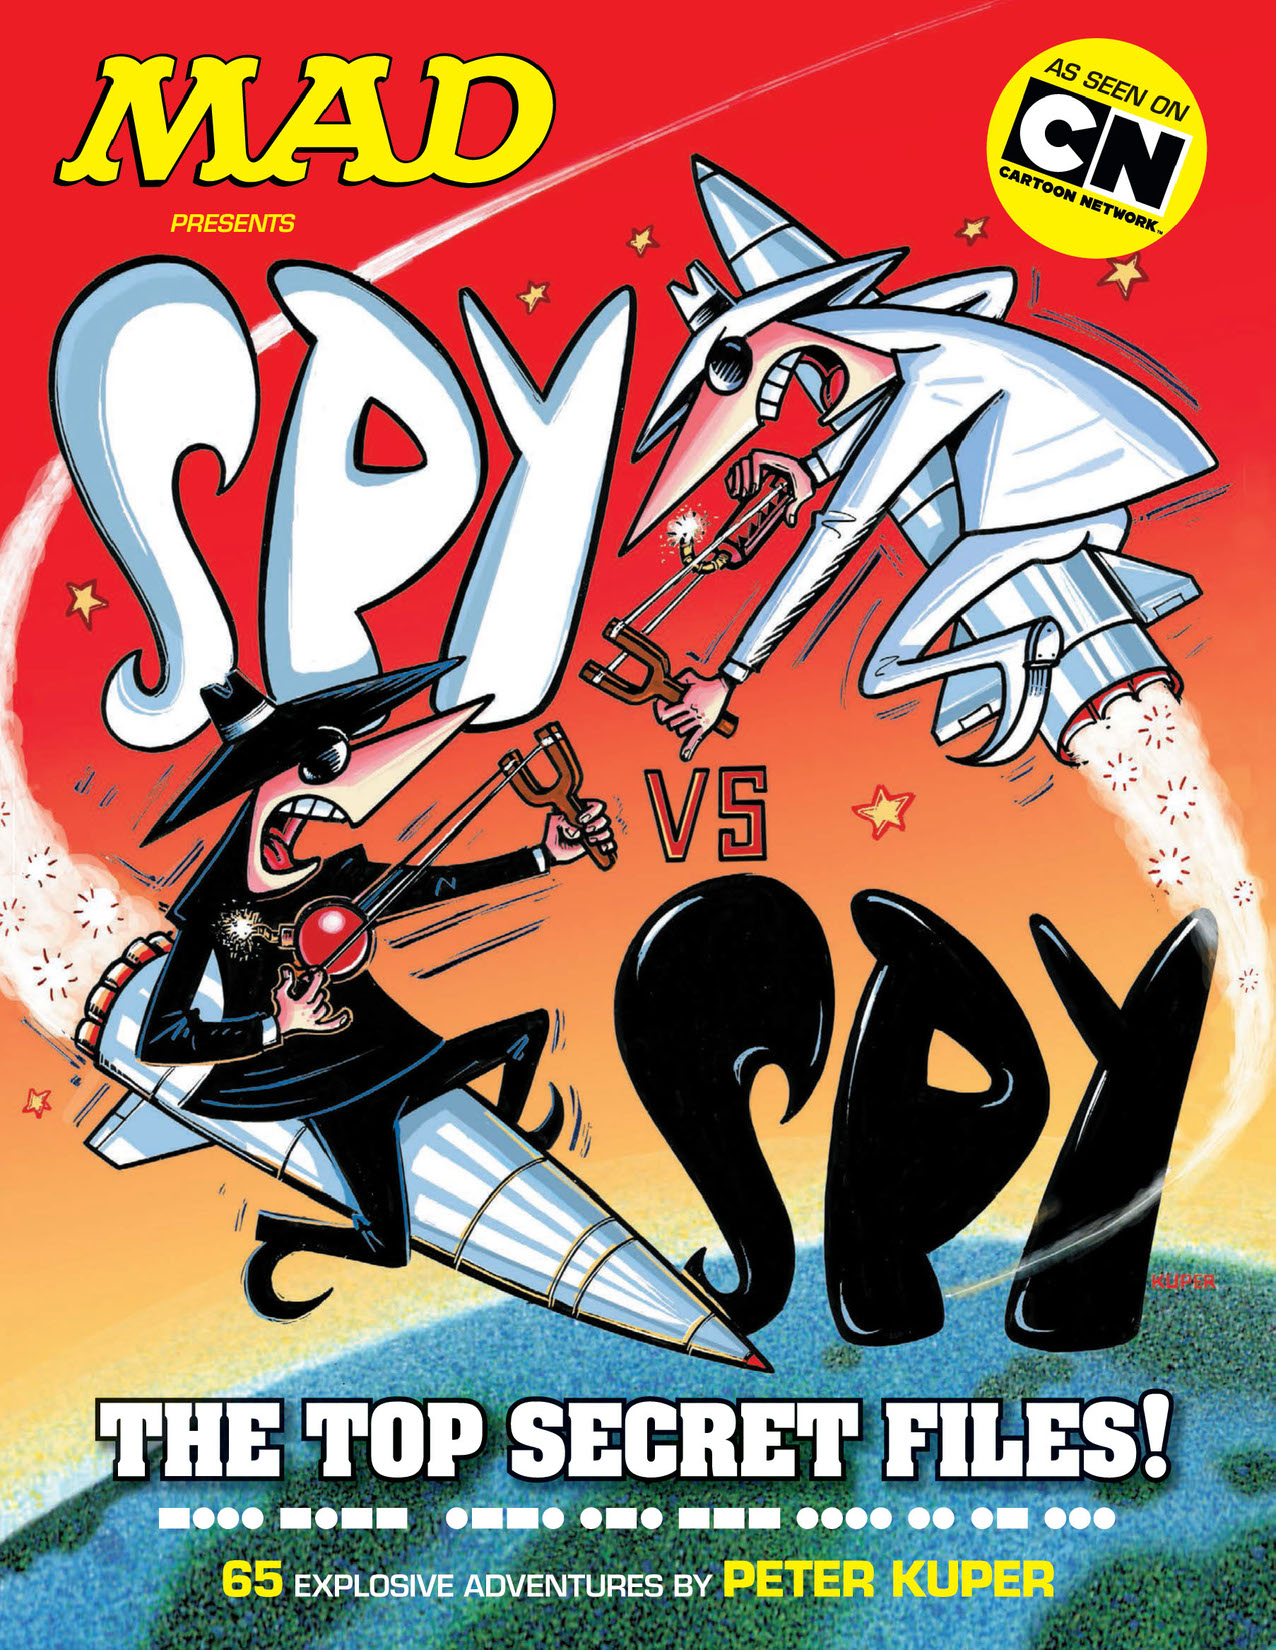 MAD Presents: Spy Vs. Spy - The Top Secret Files! preview images